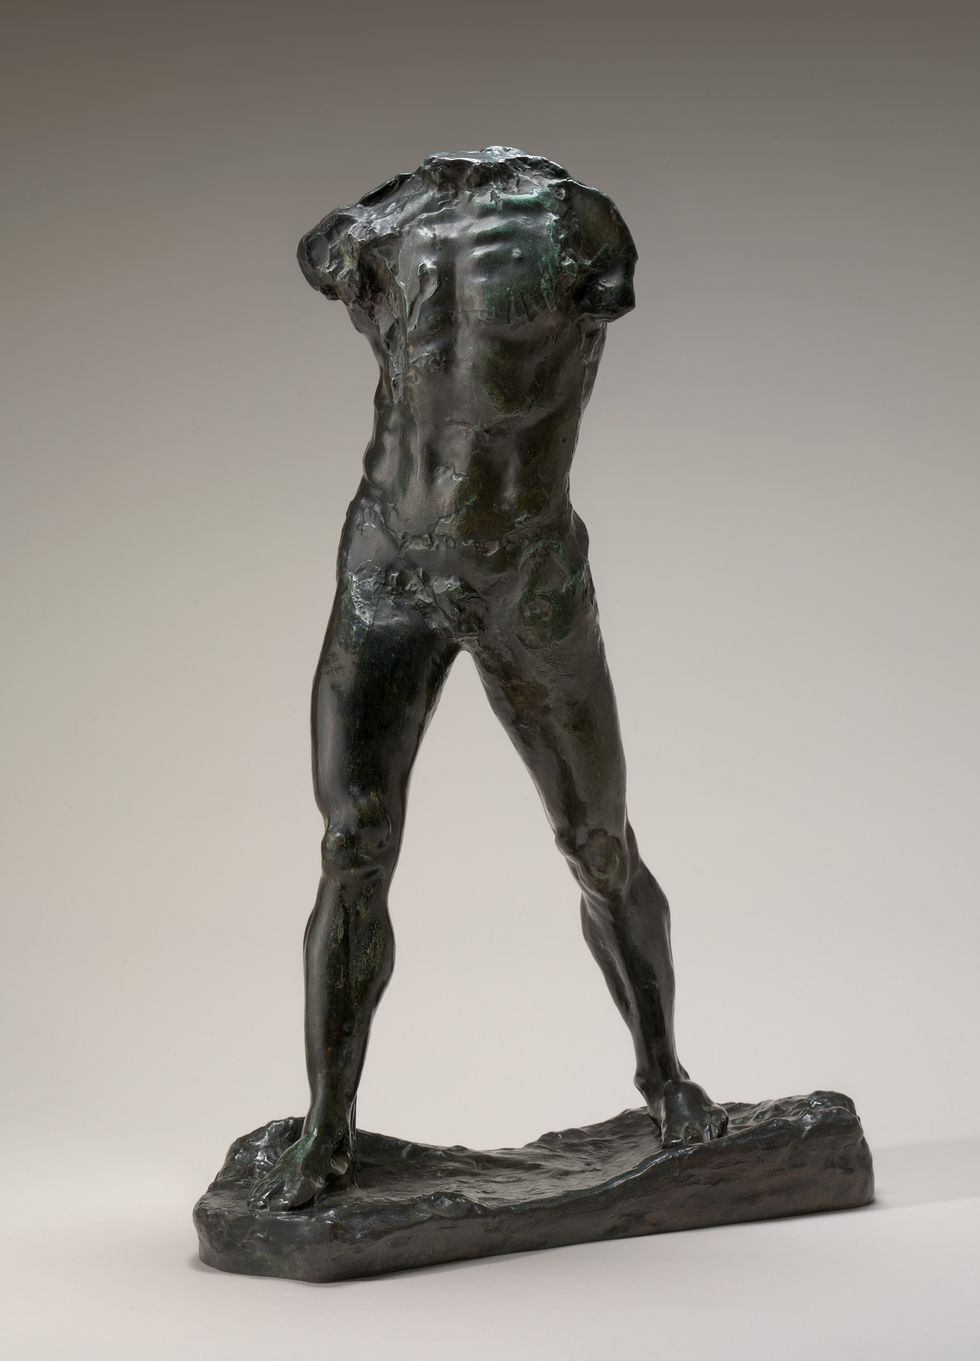 Understanding the Work and World of Rodin